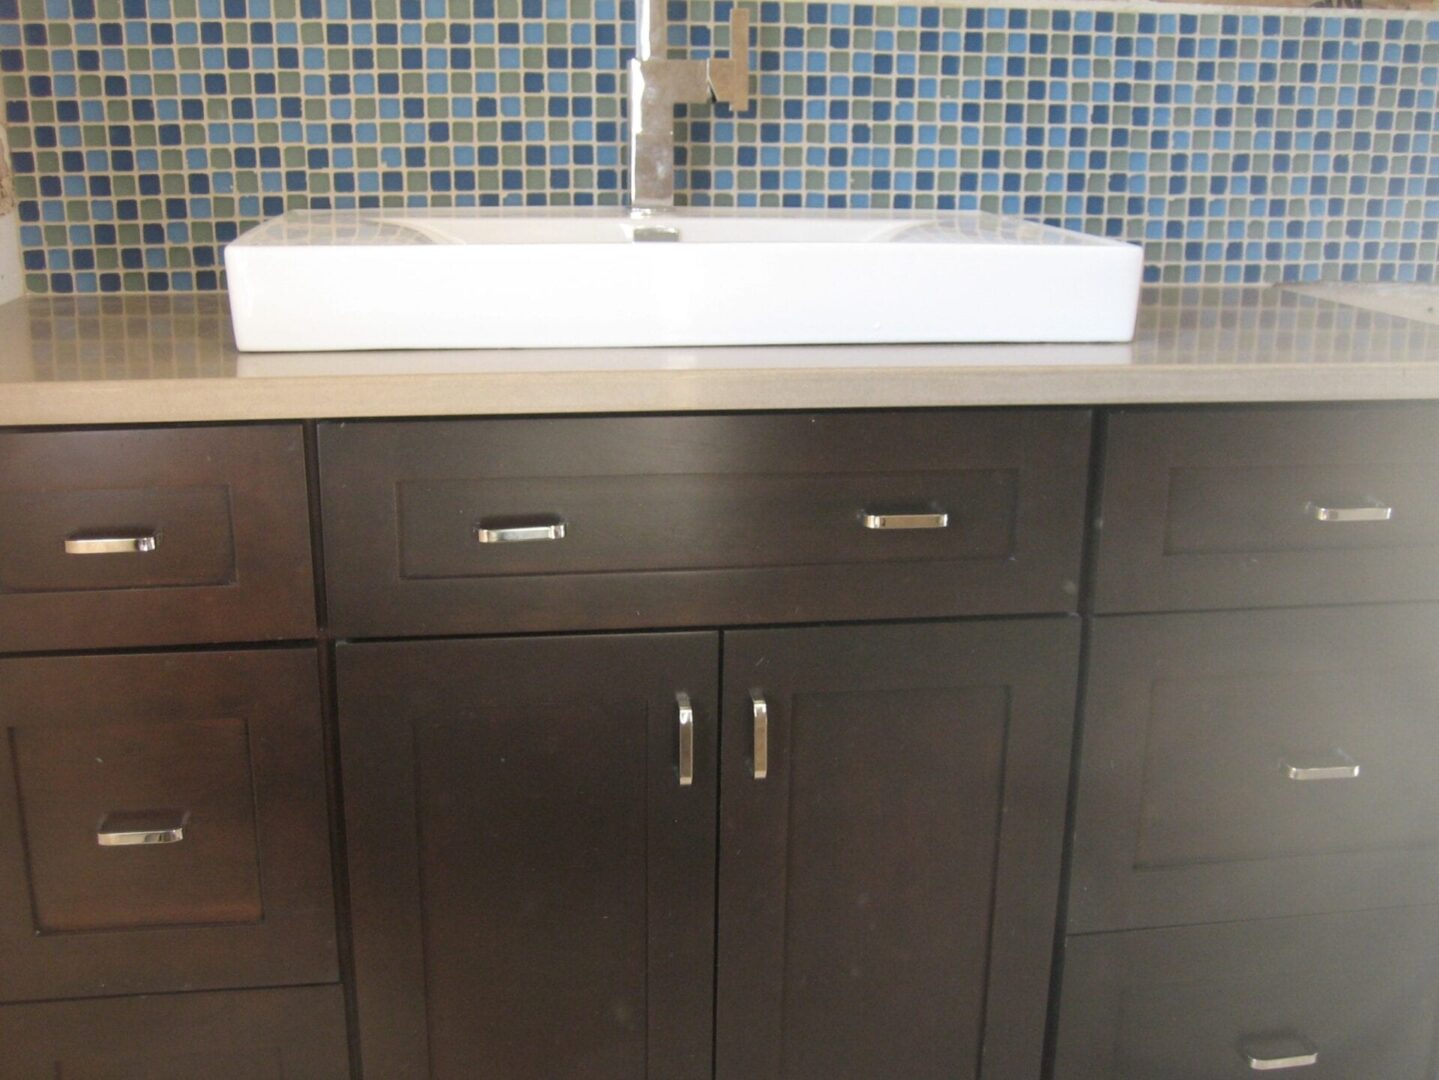 A bathroom with a sink and cabinets in it